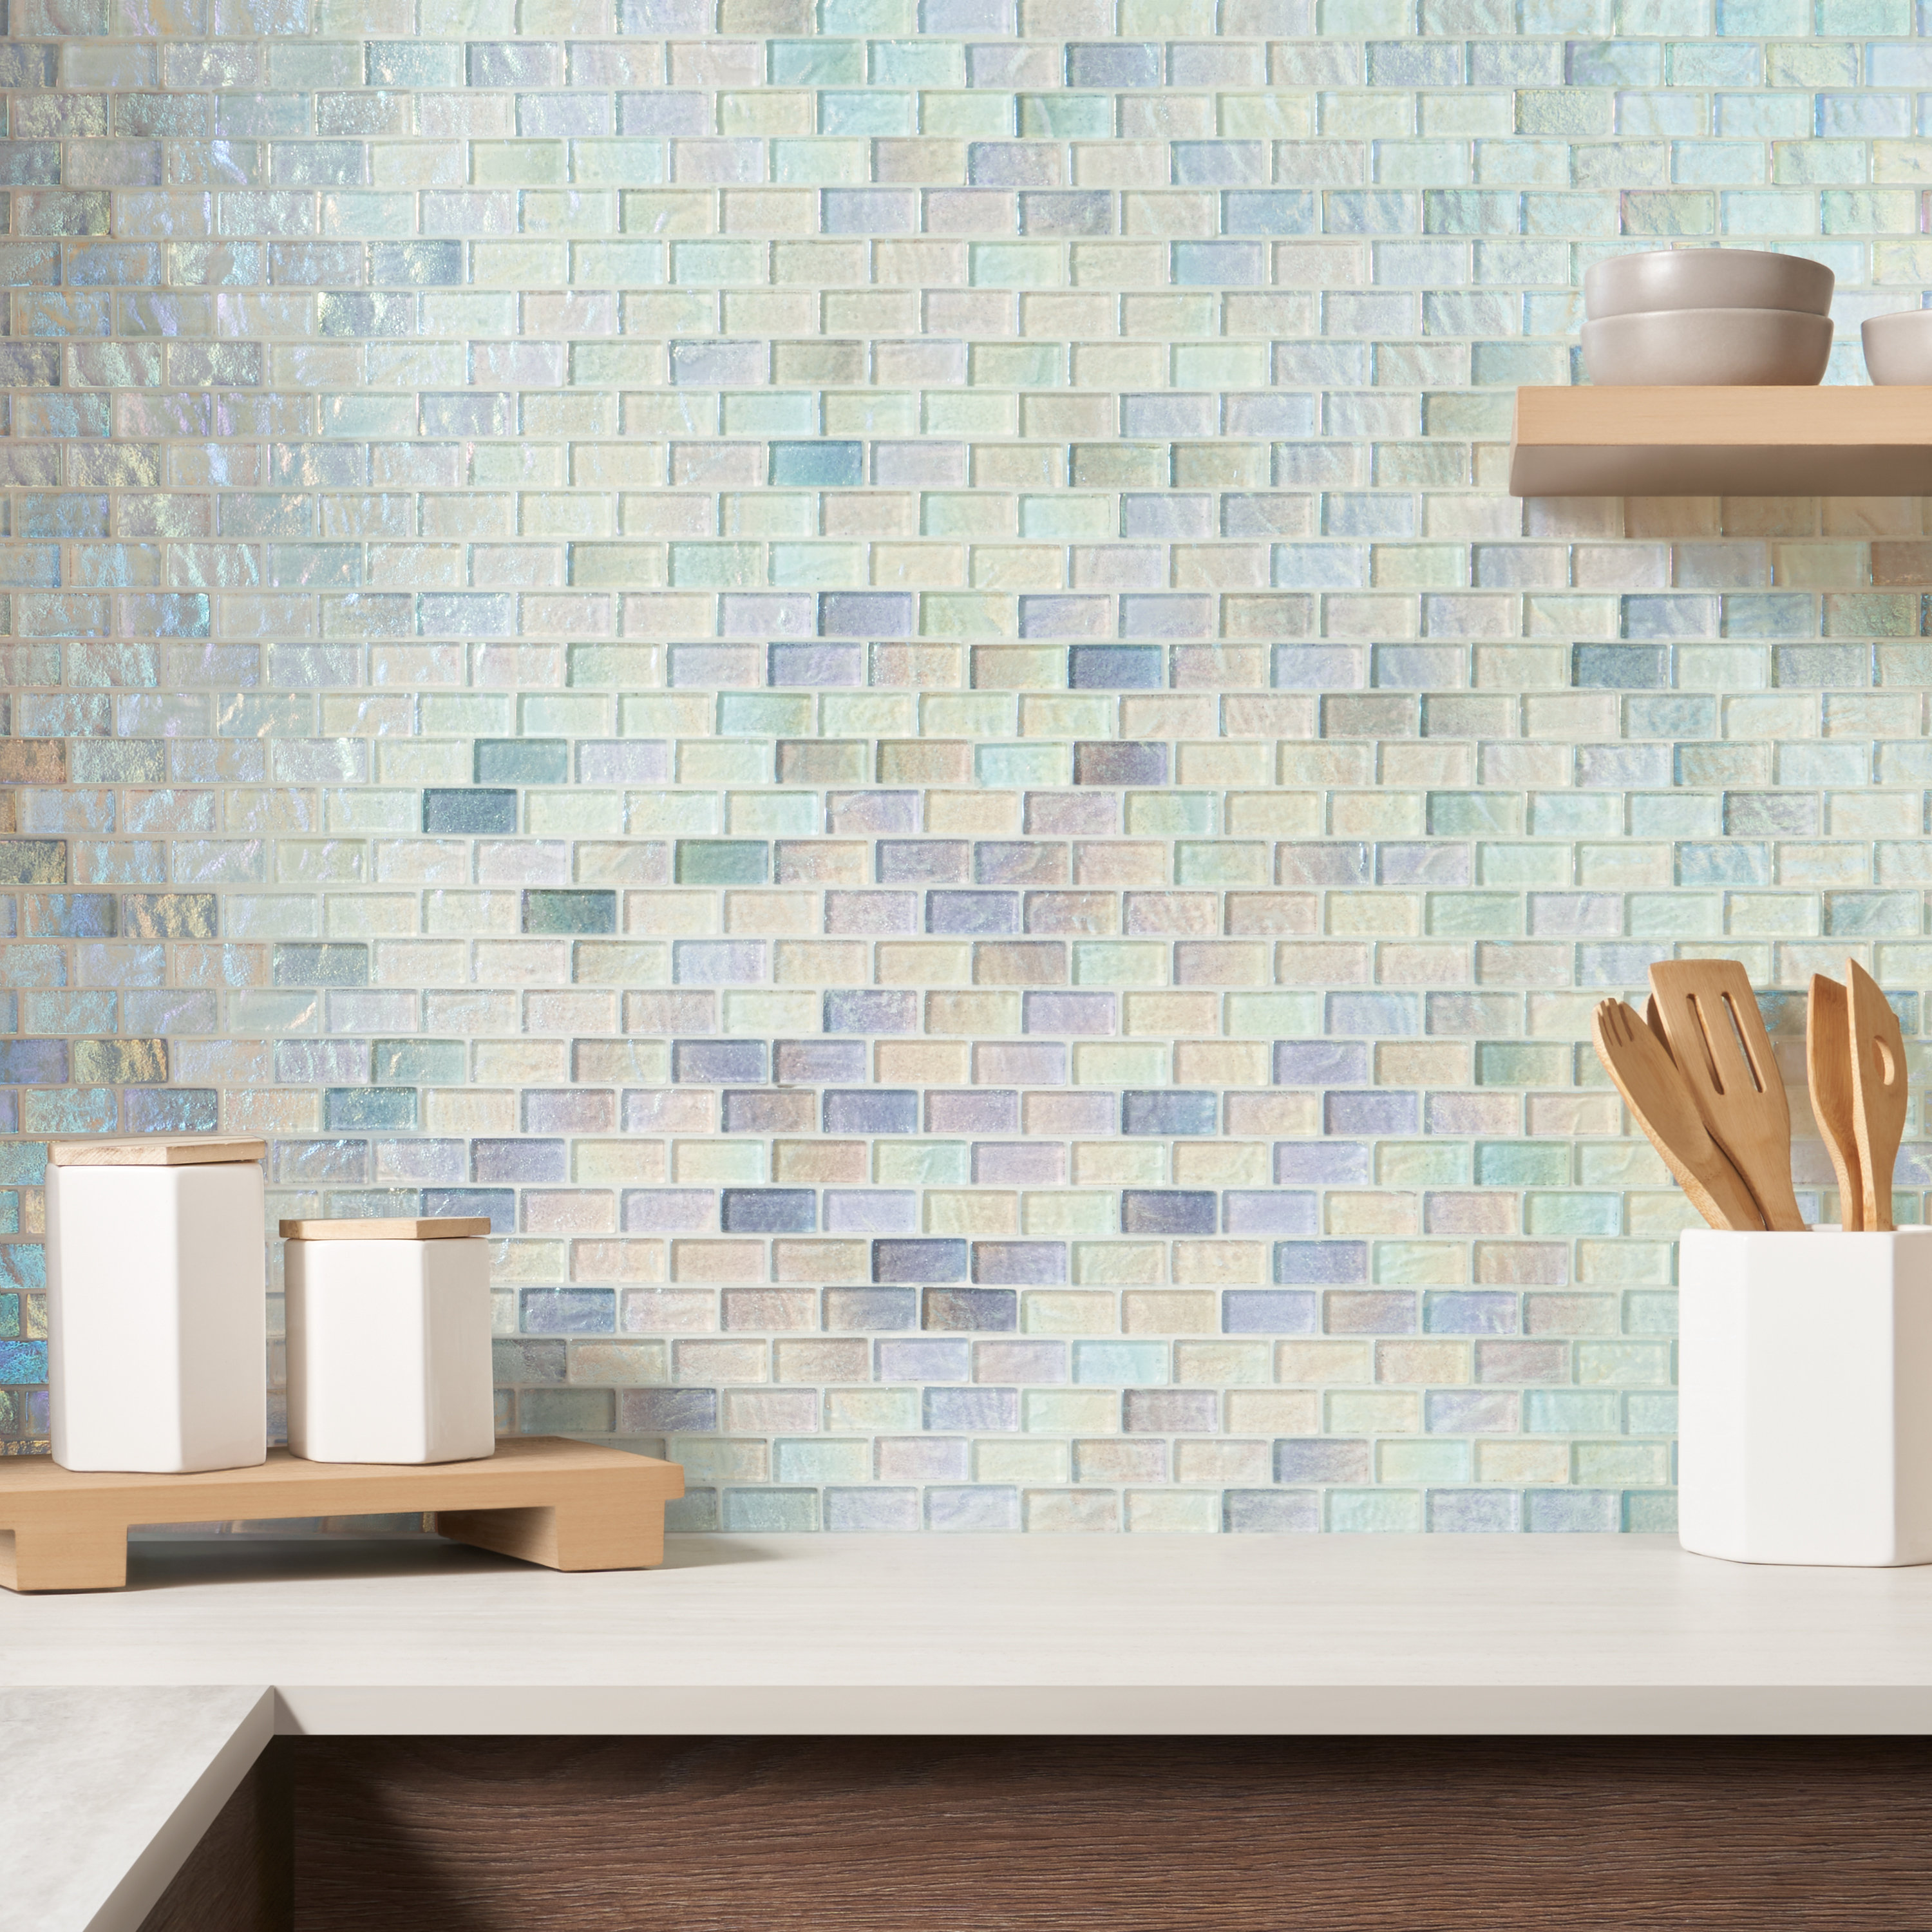 Buy Wholesale vitreous glass mosaic tiles Of Different Styles And Designs 